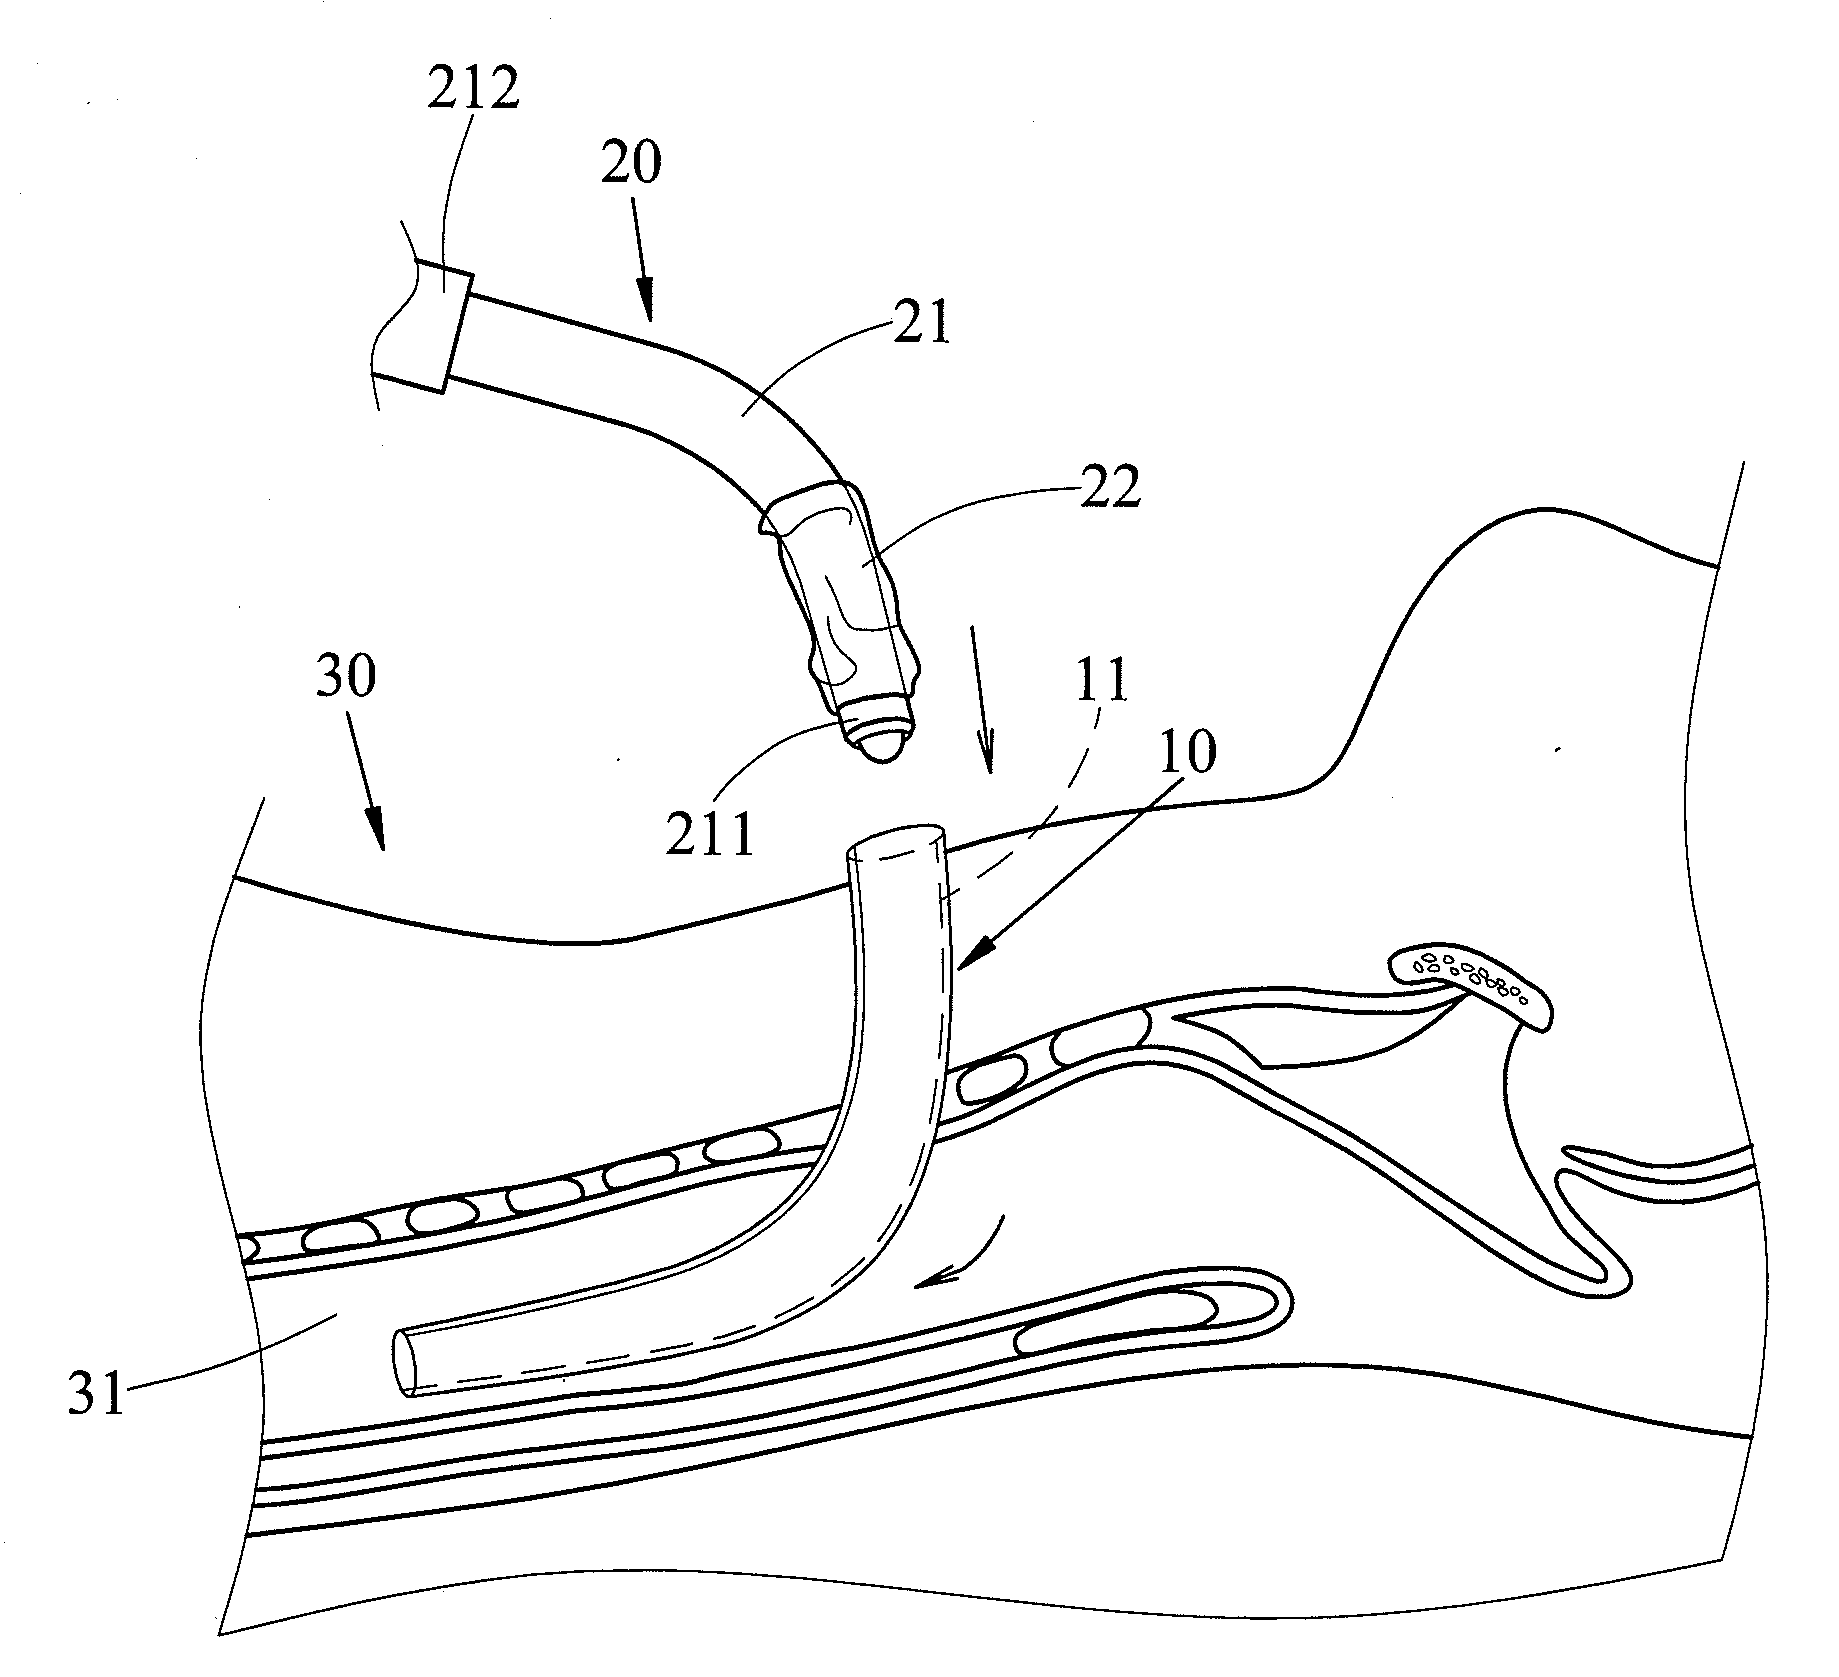 Device for Positioning Tracheostomy Tube